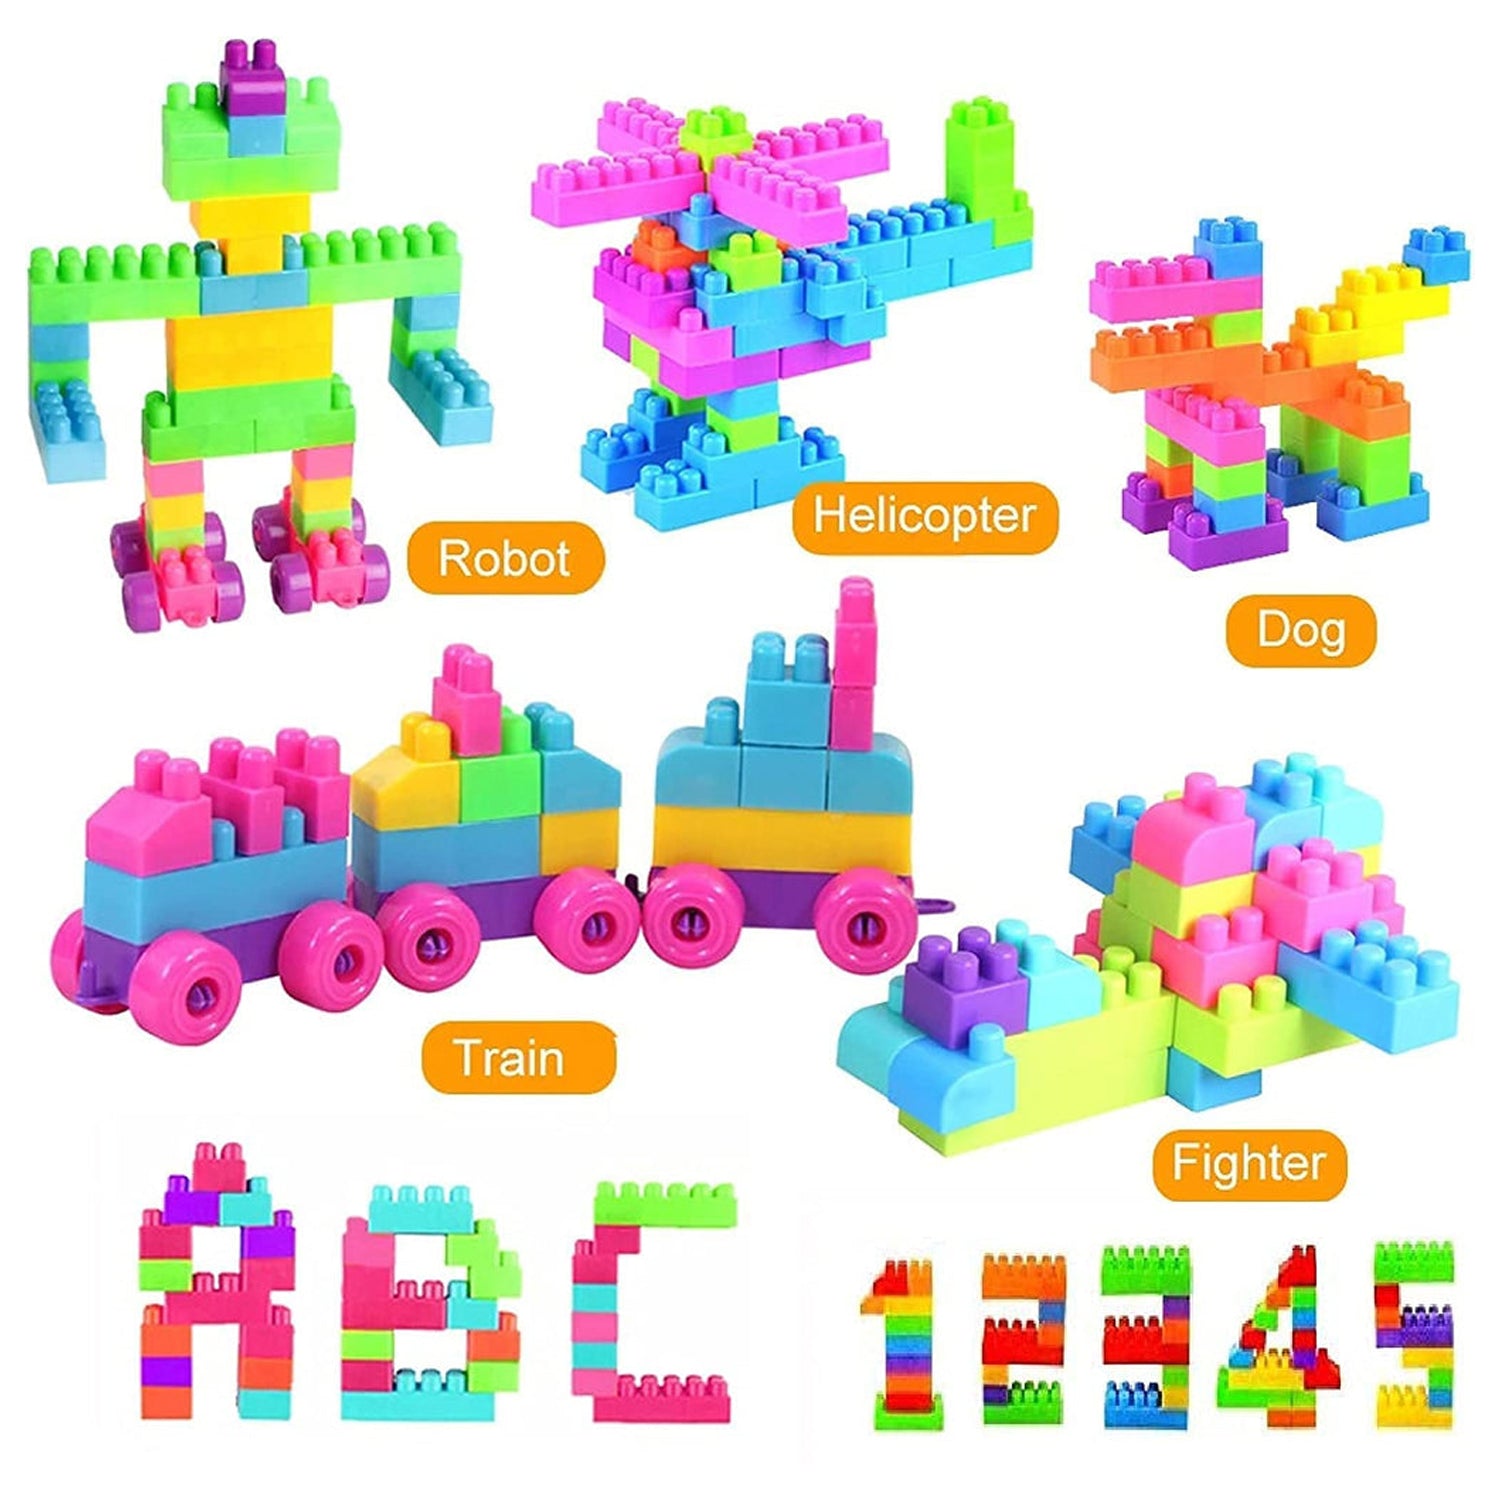 3915 200 Pc Train Blocks Toy used in all kinds of household and official places specially for kids and children for their playing and enjoying purposes.